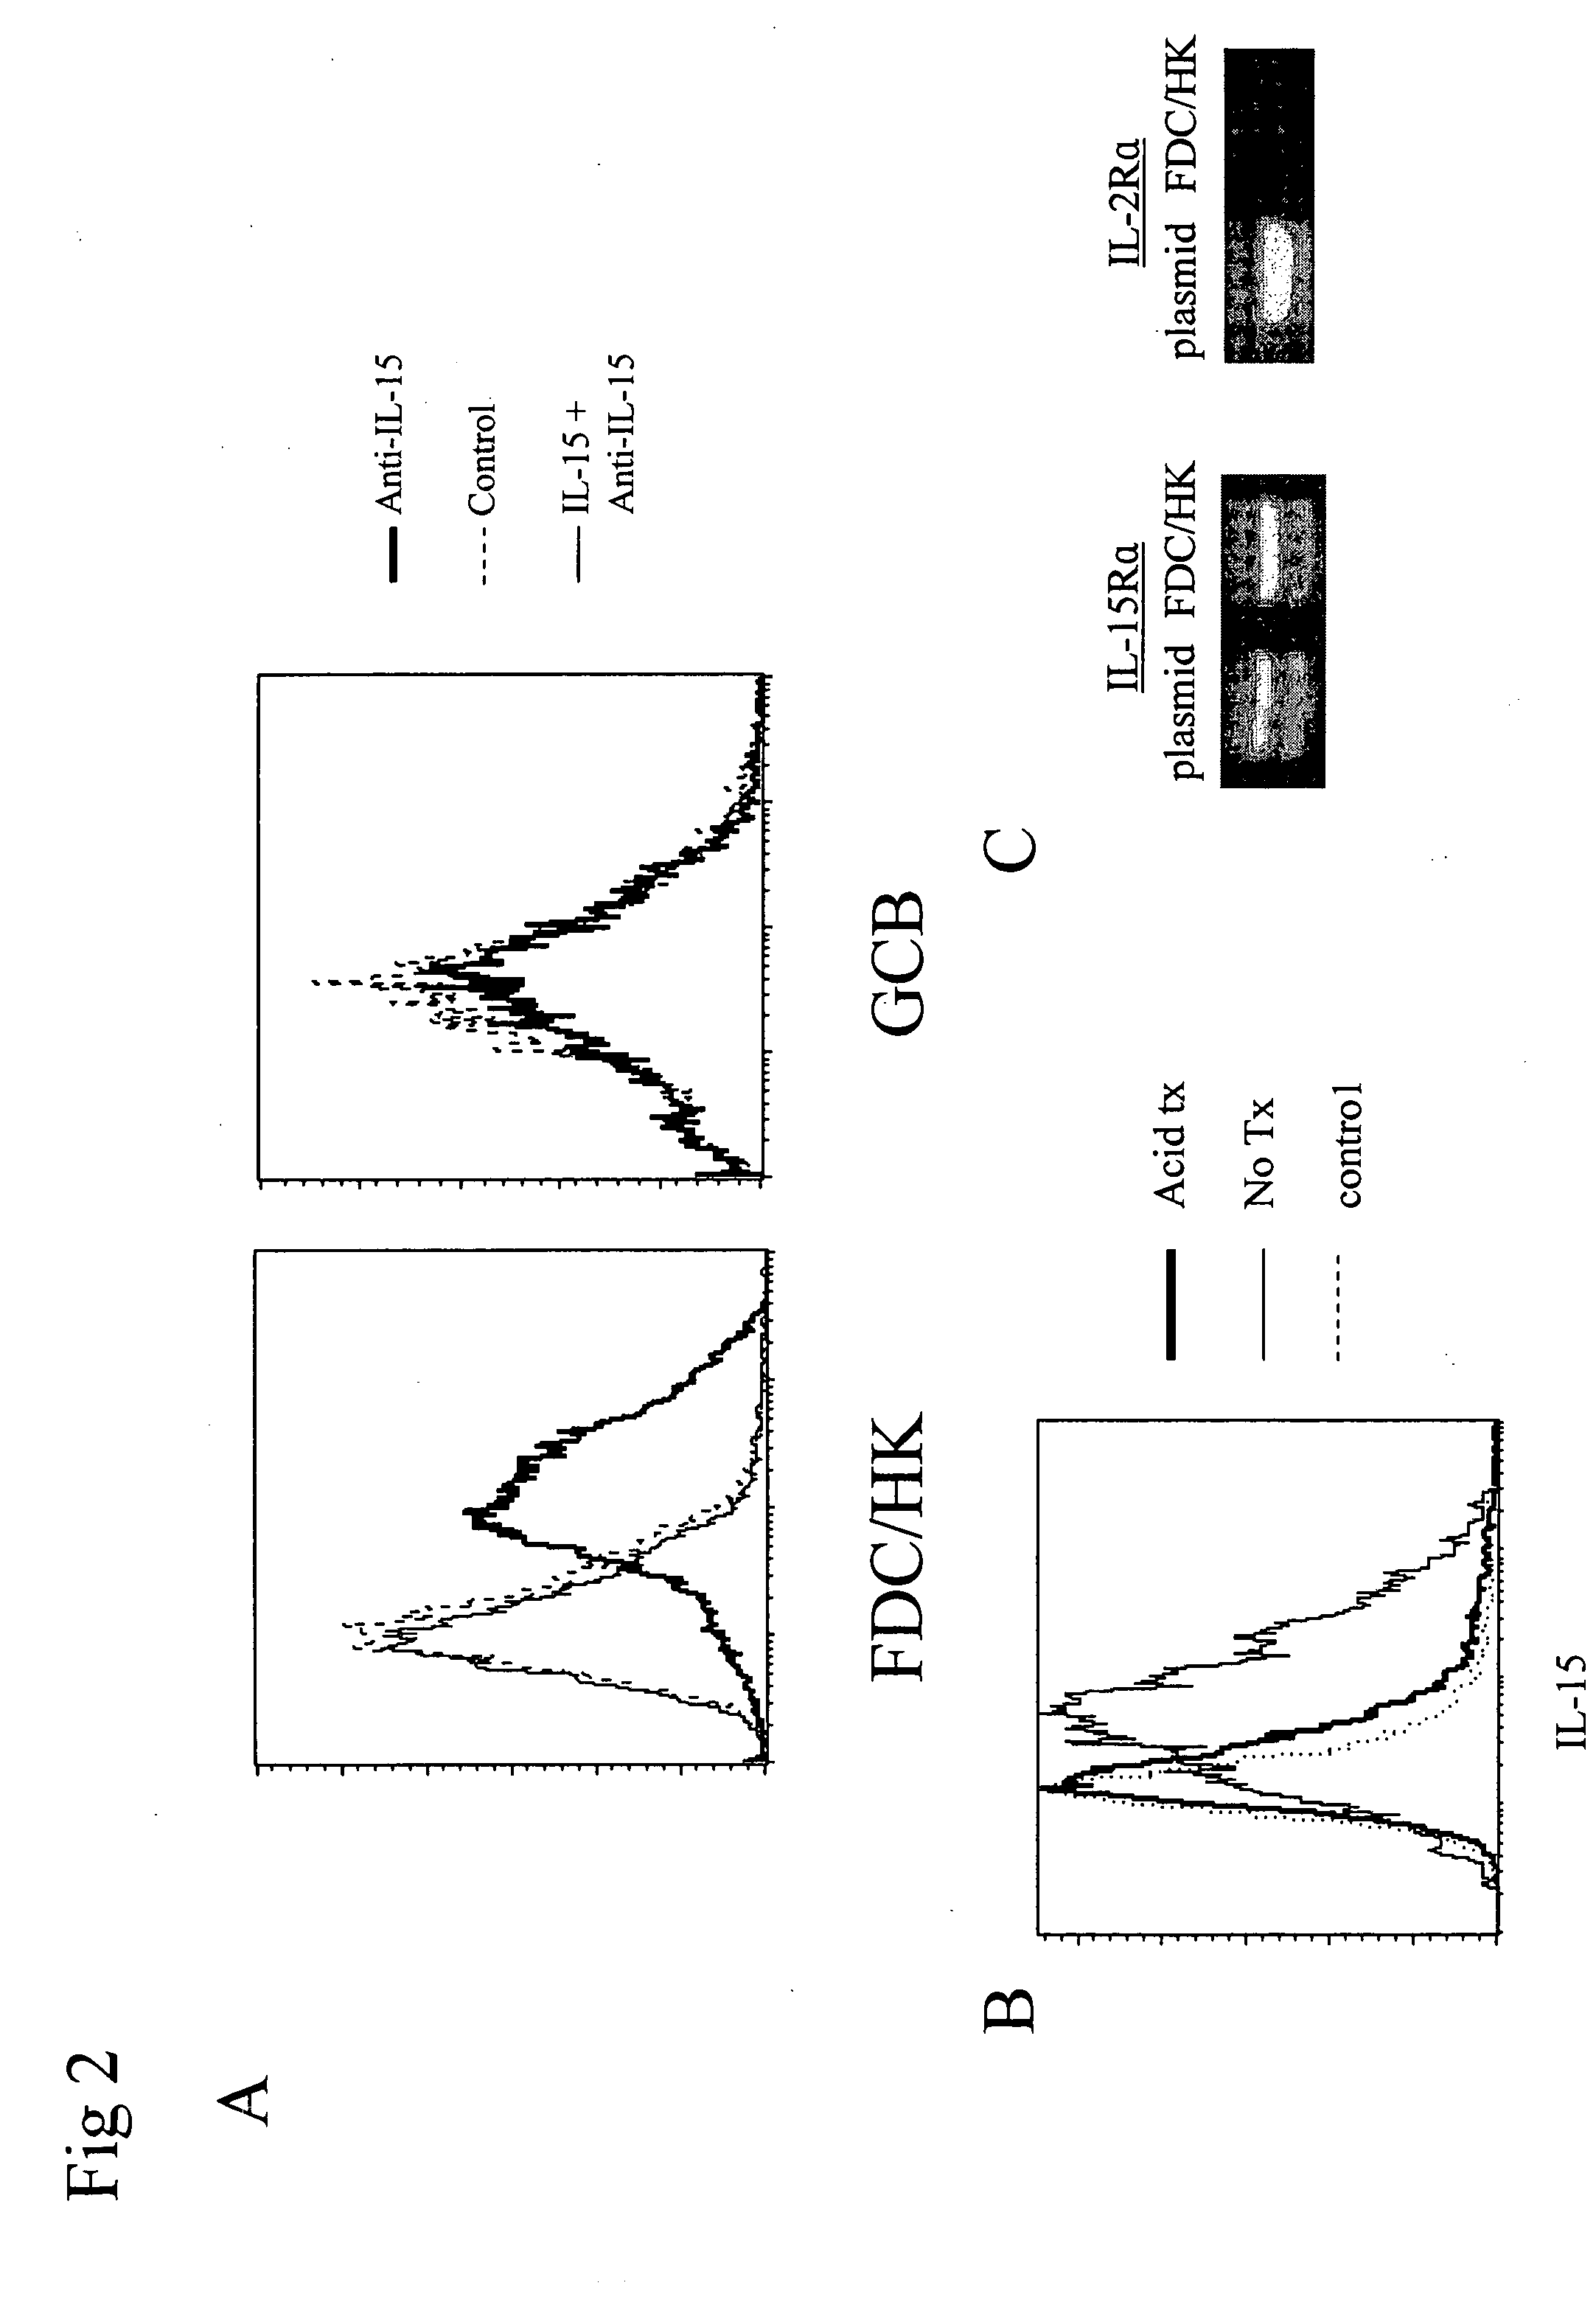 Enhancement of B cell proliferation by IL-15